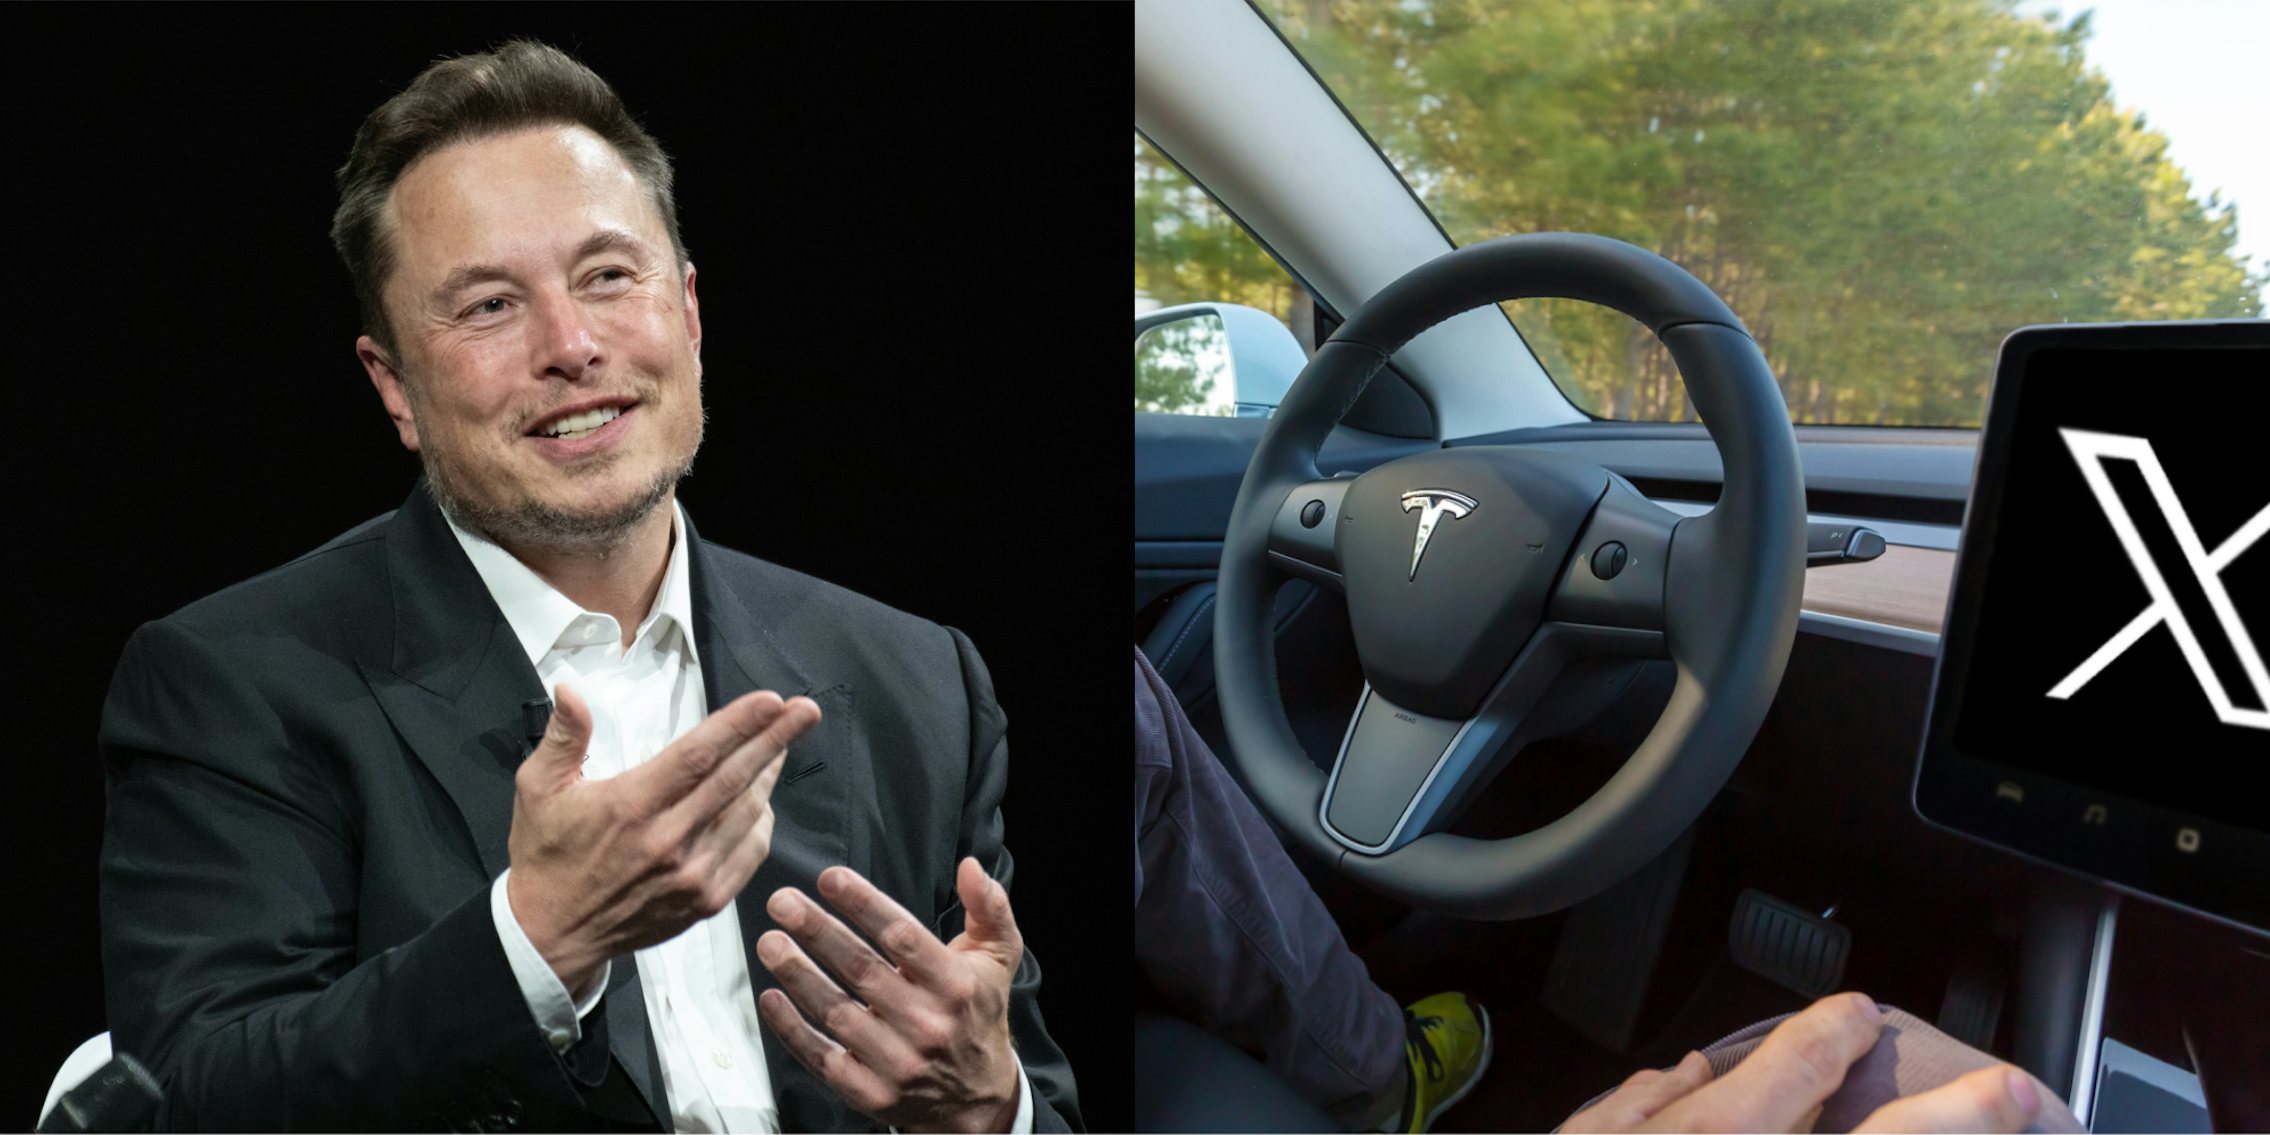 Elon Musk in front of black background (l) Tesla car interior with steering wheel and screen with X app logo (r)